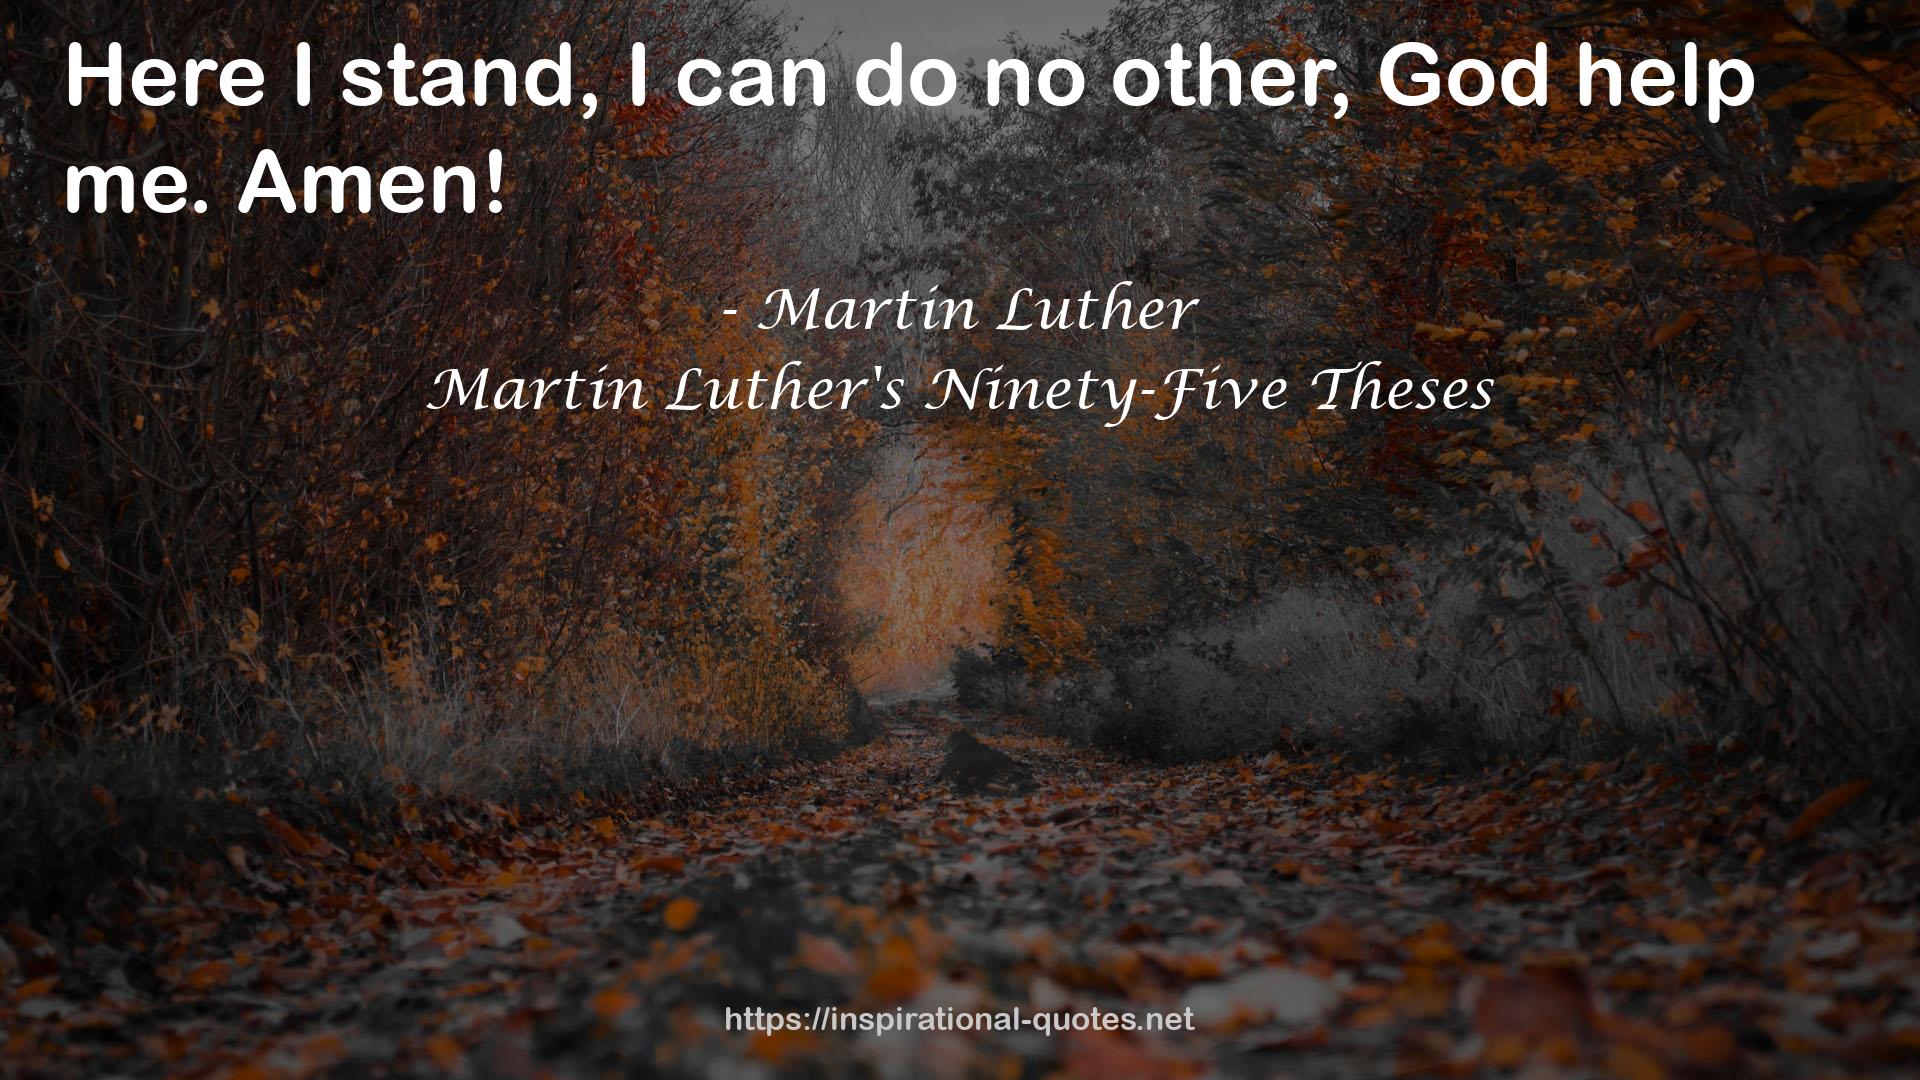 Martin Luther's Ninety-Five Theses QUOTES